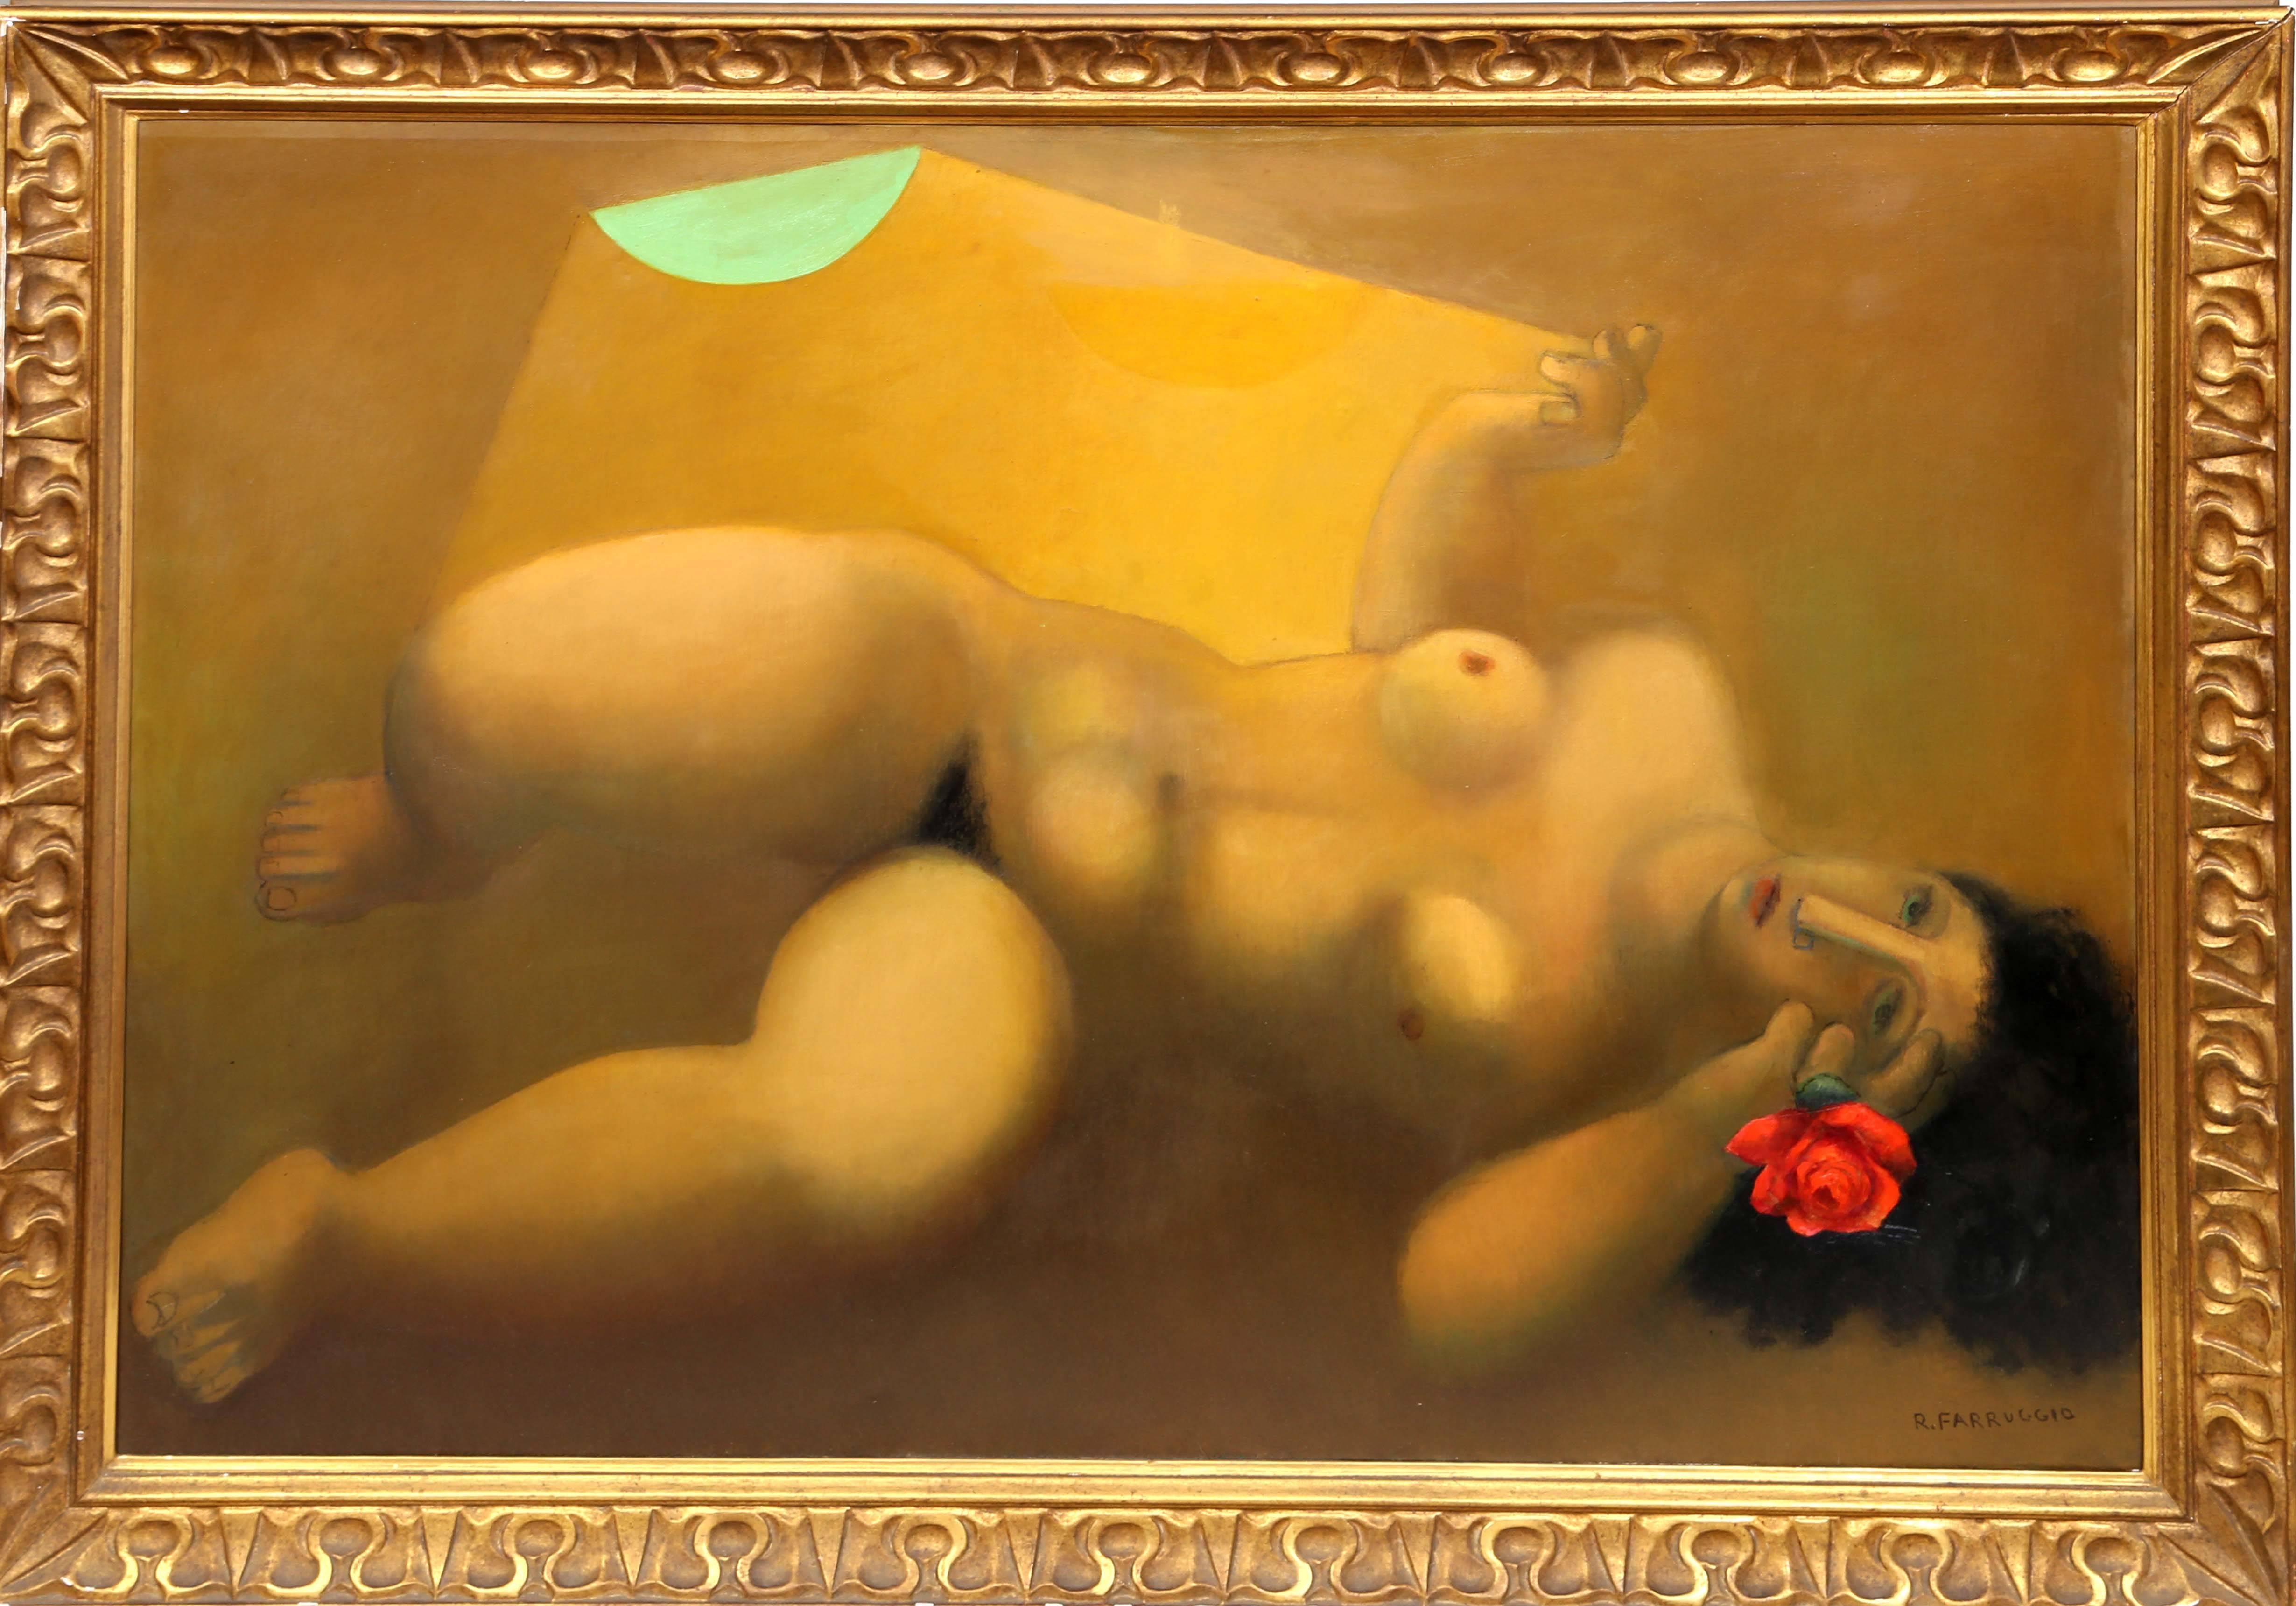 Reclining Nude with Rose, Painting Remo Michael Farruggio